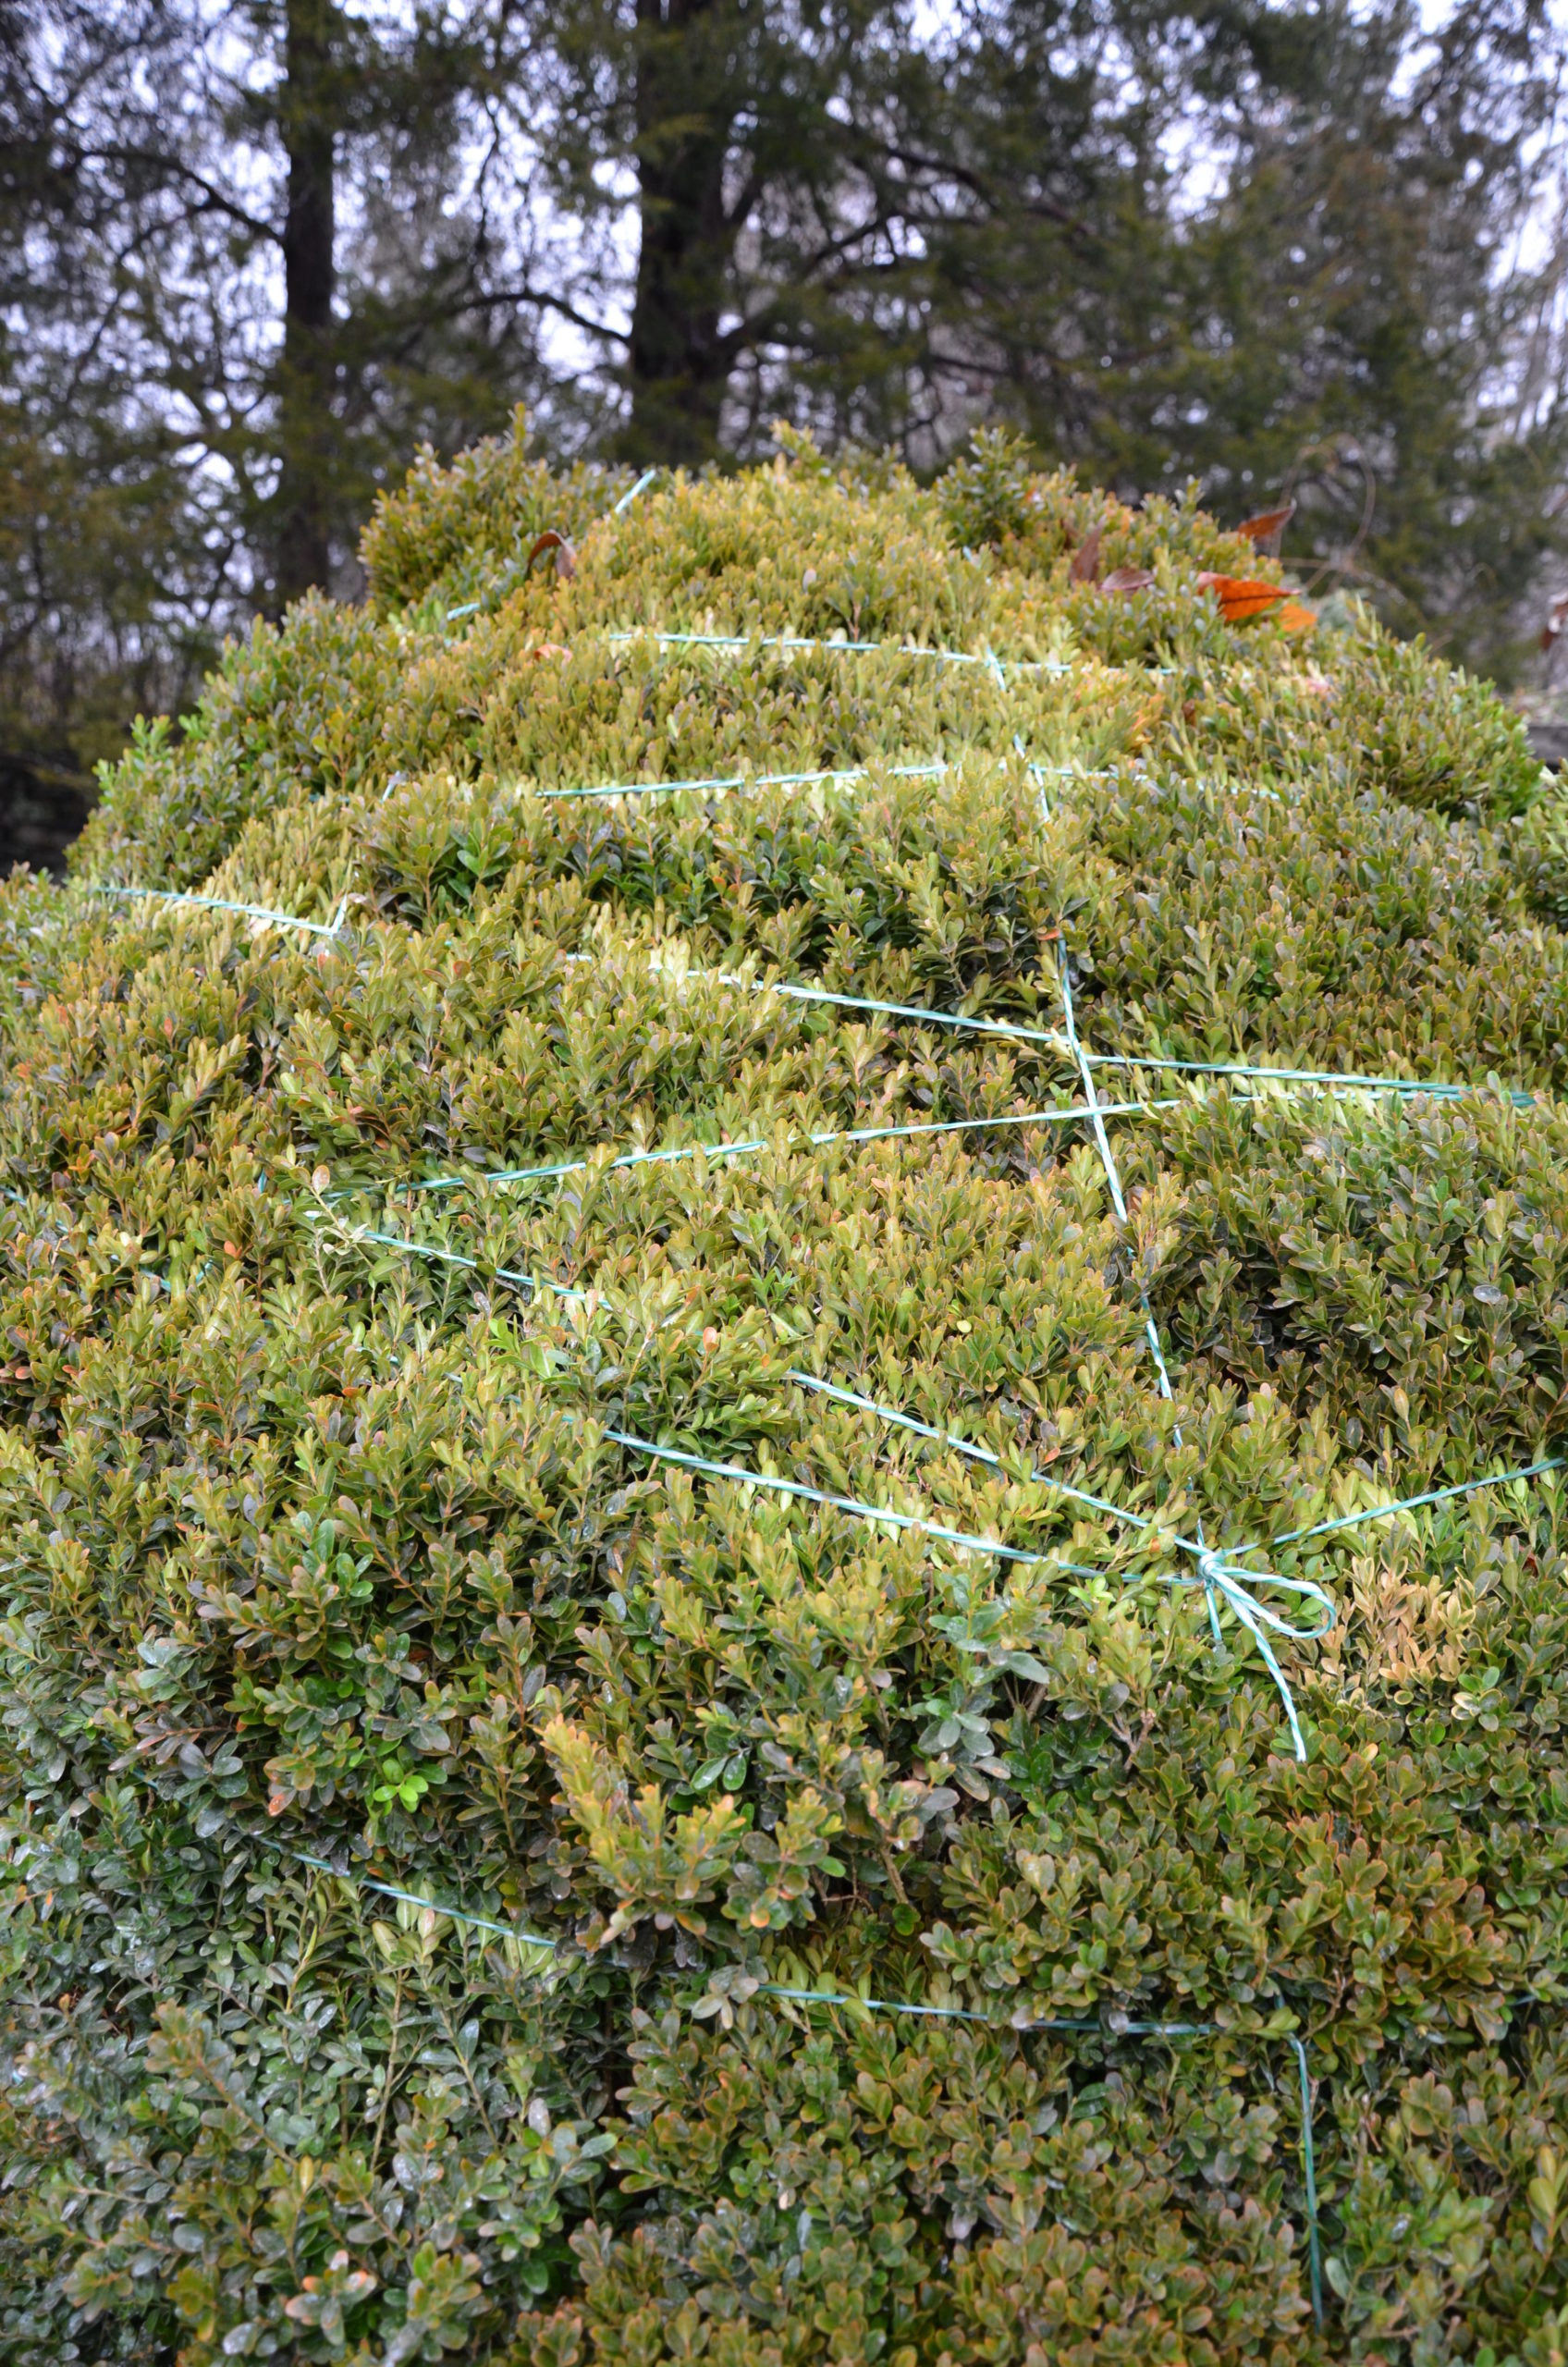 Boxwoods can get some winter protection by being tied and bundled like this one or enclosed in burlap. The question is, does this exacerbates any boxwood blight issues?